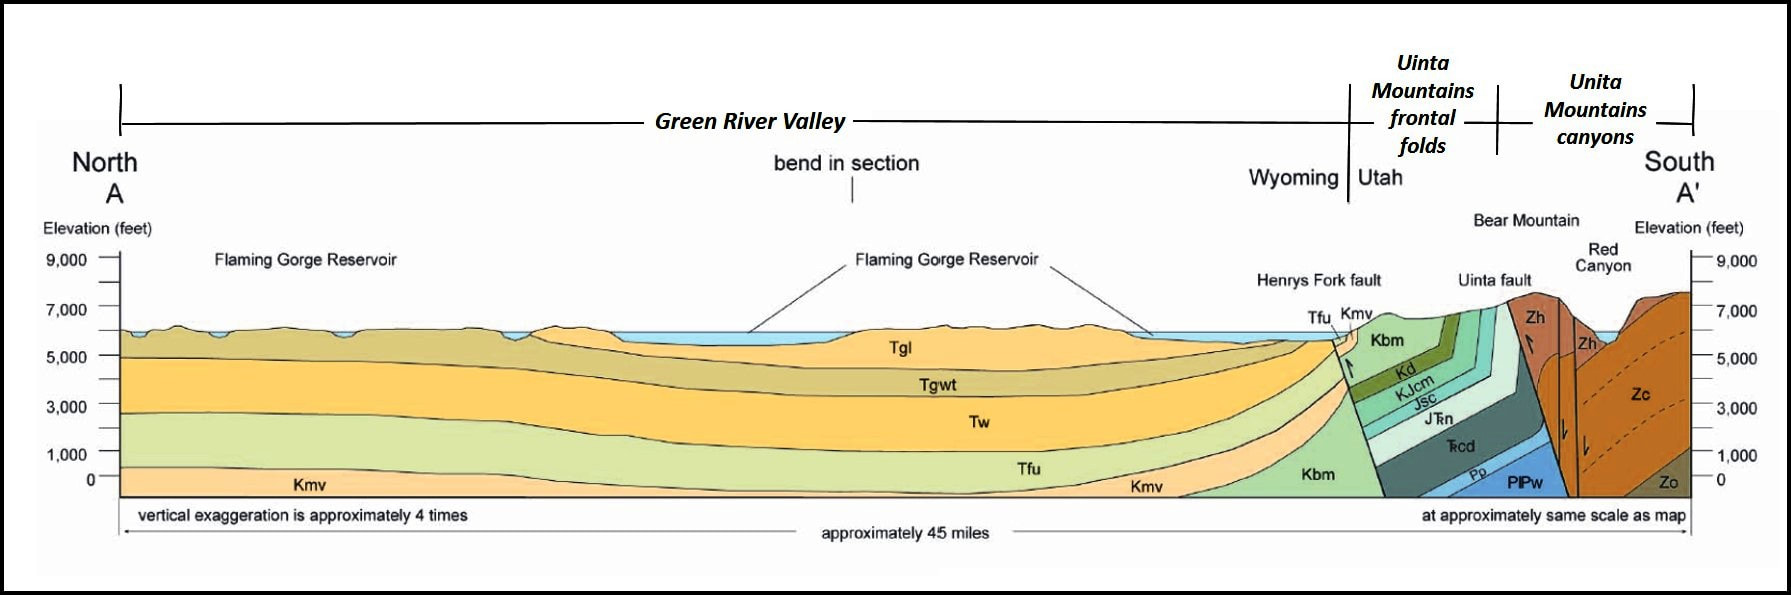 Geologic cross section through Flaming Gorge area, Wyoming and Utah